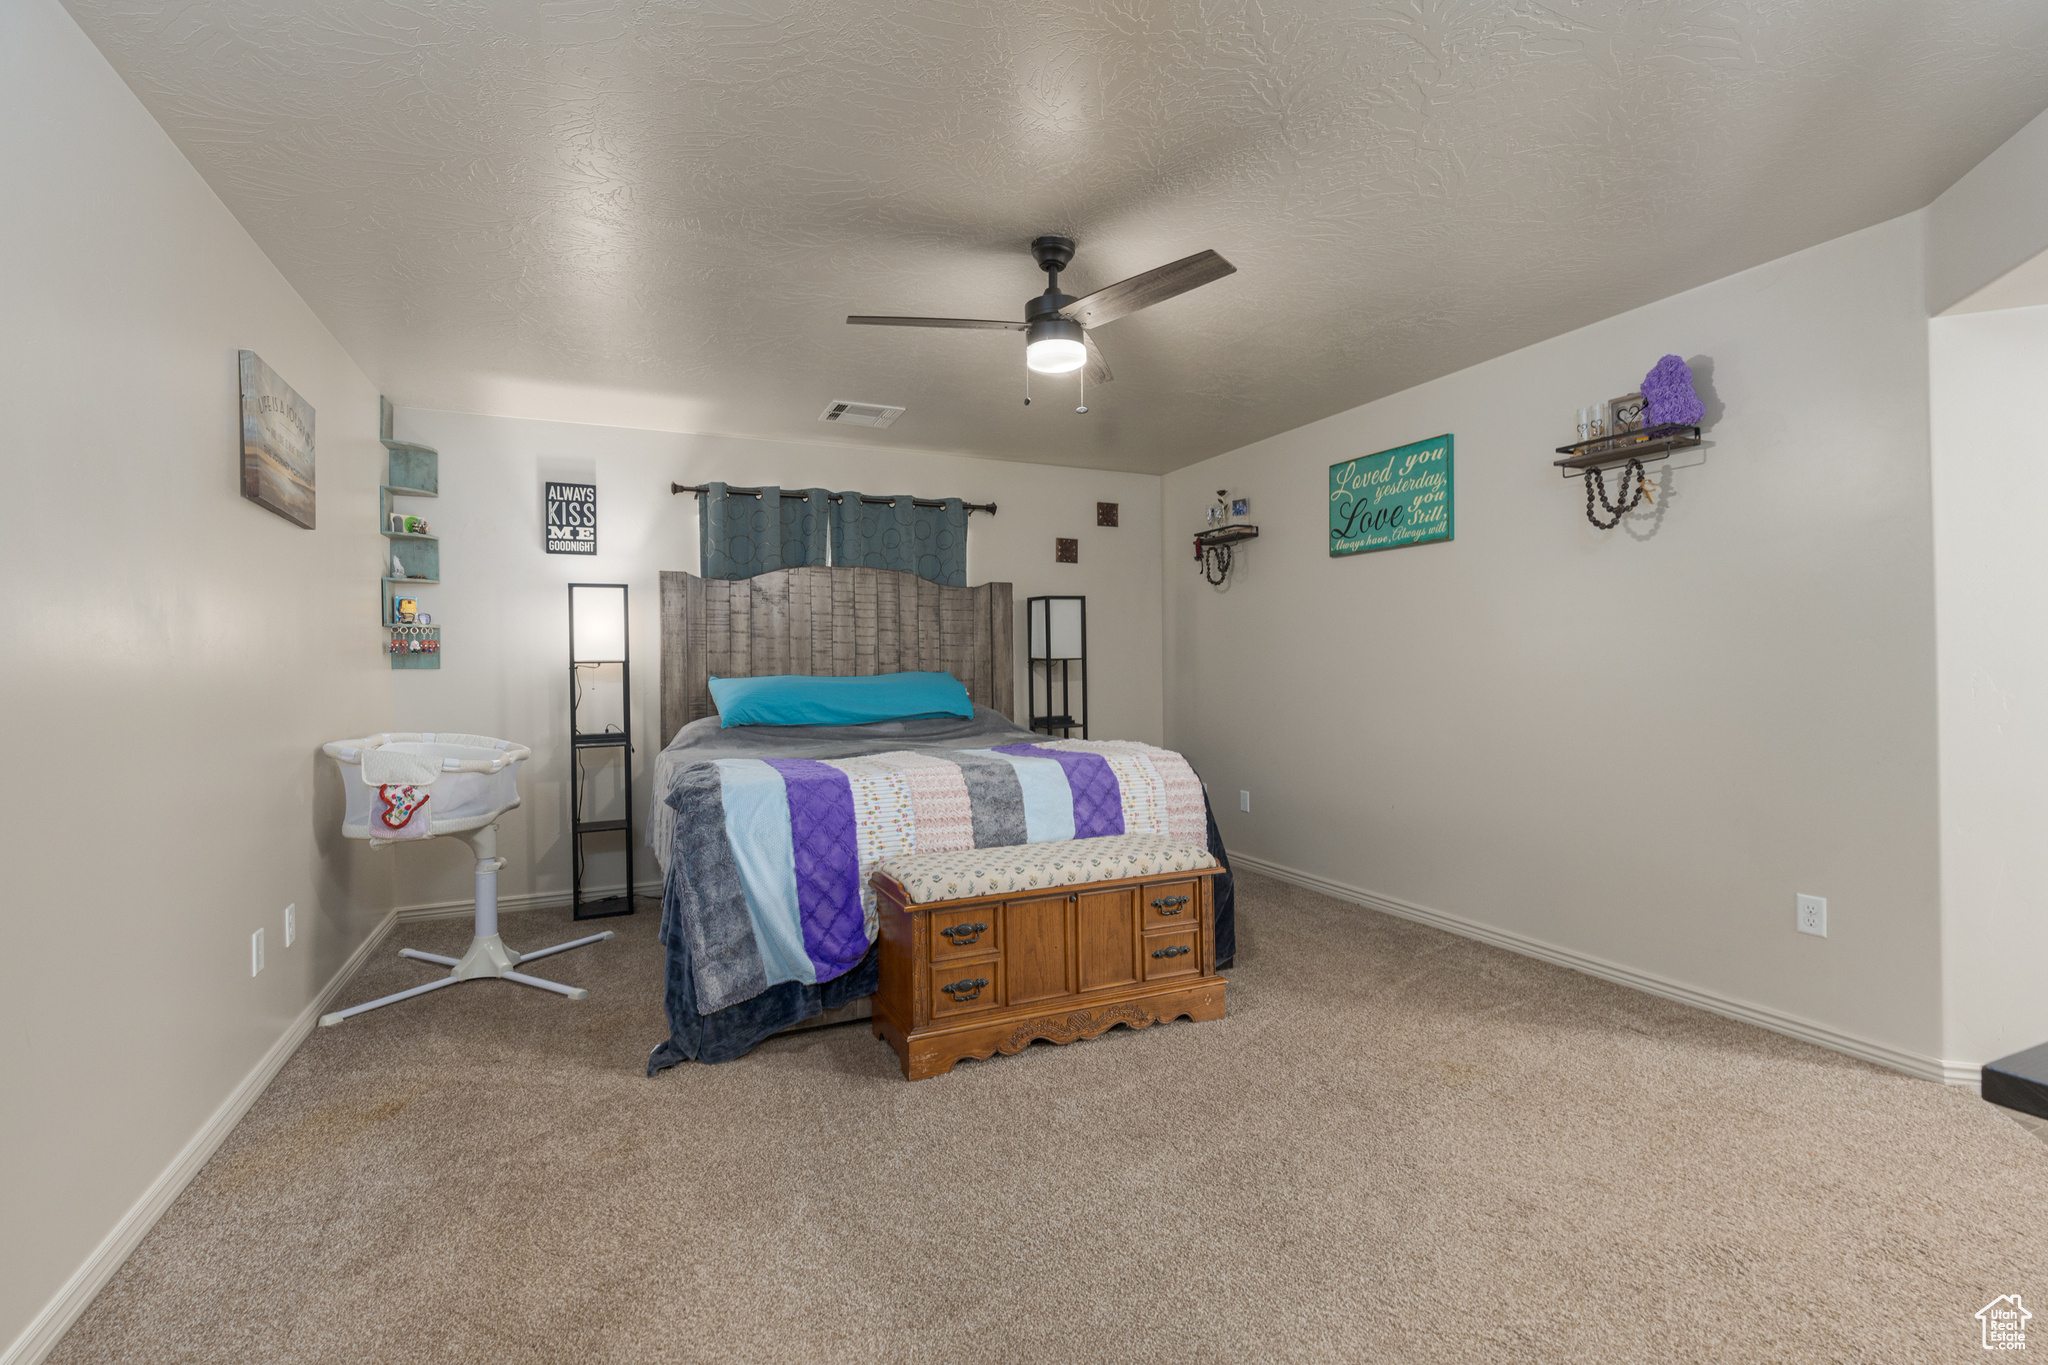 Carpeted bedroom featuring ceiling fan and a textured ceiling